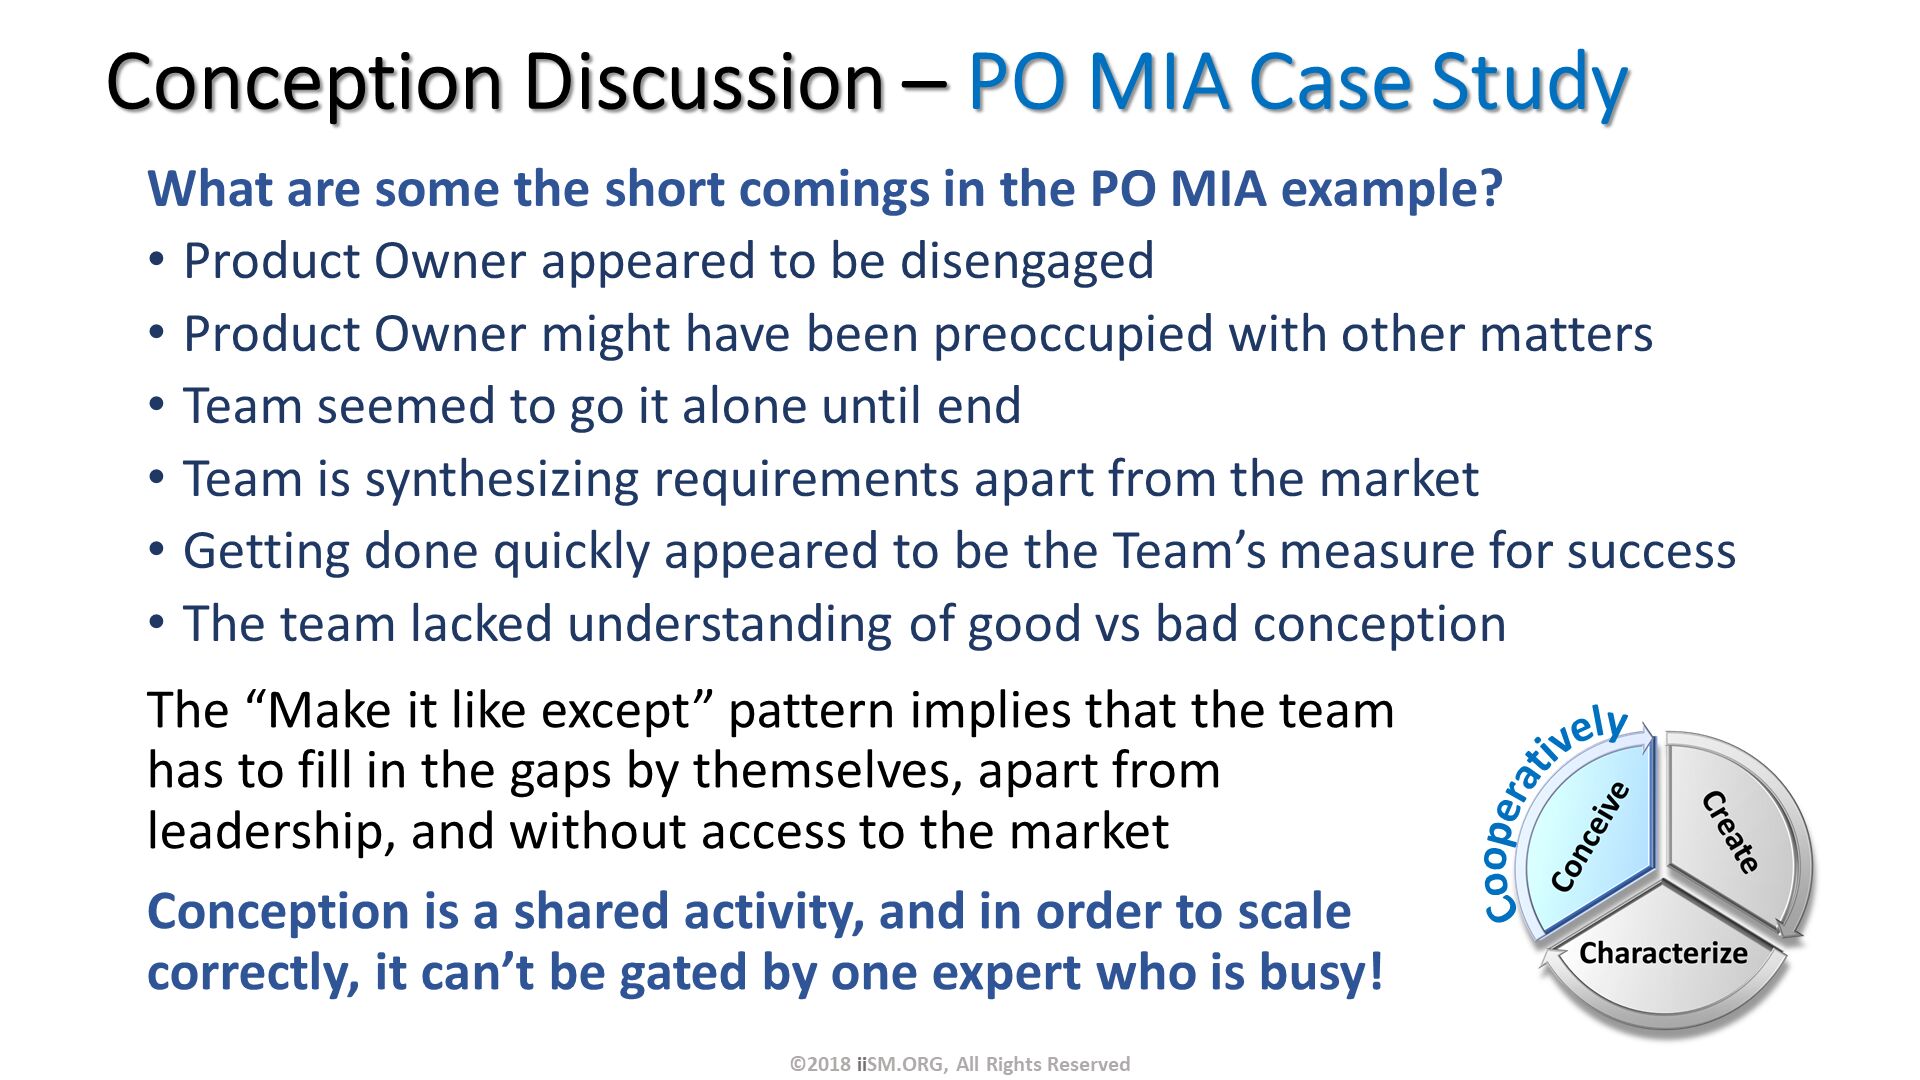 What are some the short comings in the PO MIA example?
Product Owner appeared to be disengaged
Product Owner might have been preoccupied with other matters
Team seemed to go it alone until end
Team is synthesizing requirements apart from the market
Getting done quickly appeared to be the Team’s measure for success
The team lacked understanding of good vs bad conception. Conception Discussion – PO MIA Case Study. The “Make it like except” pattern implies that the team has to fill in the gaps by themselves, apart from leadership, and without access to the market
Conception is a shared activity, and in order to scale correctly, it can’t be gated by one expert who is busy!. ©2018 iiSM.ORG, All Rights Reserved. Cooperatively. 